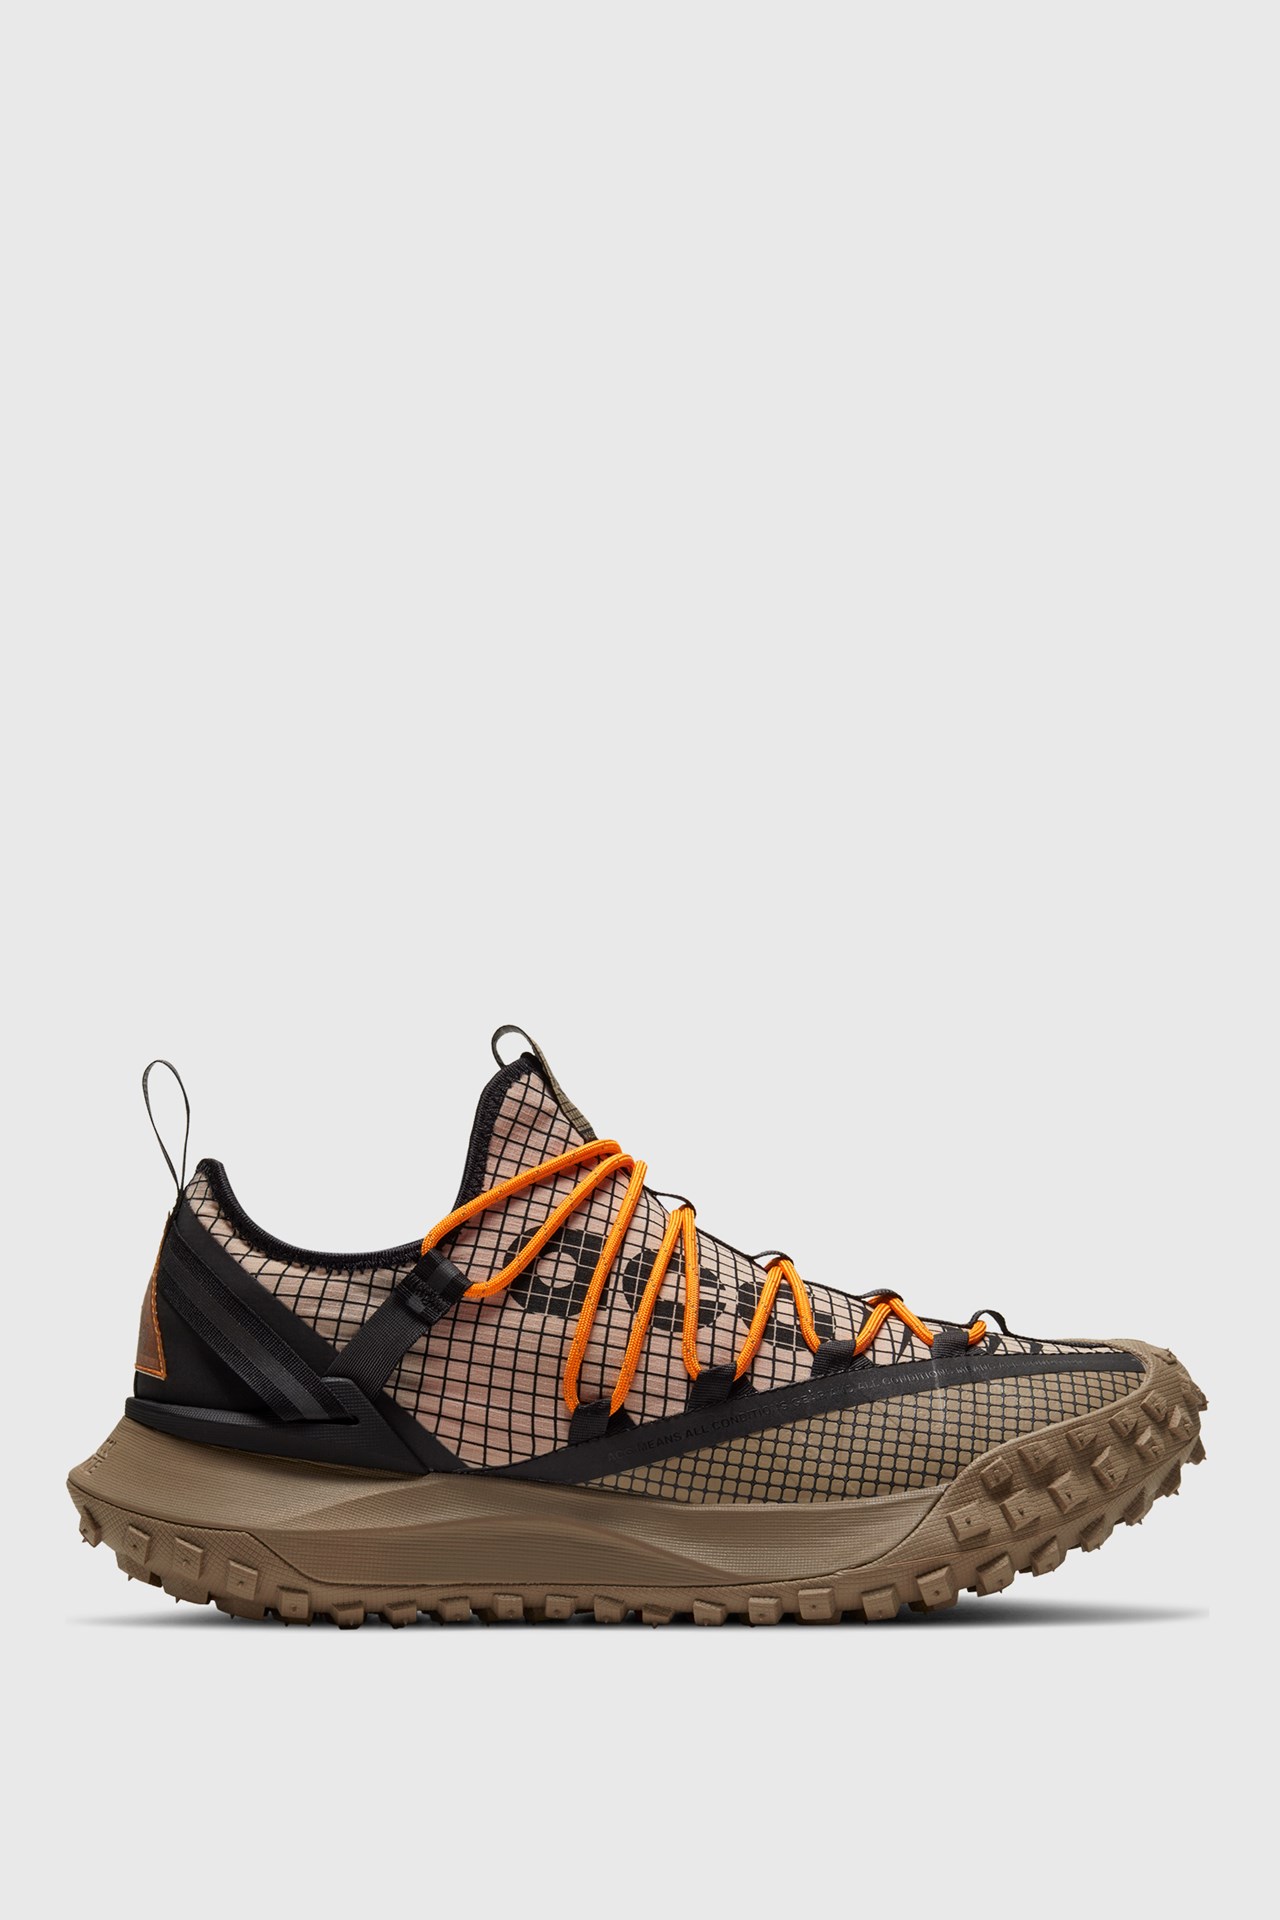 Nike ACG Mountain Fly Low Fossil stone/black (200) | WoodWood.com